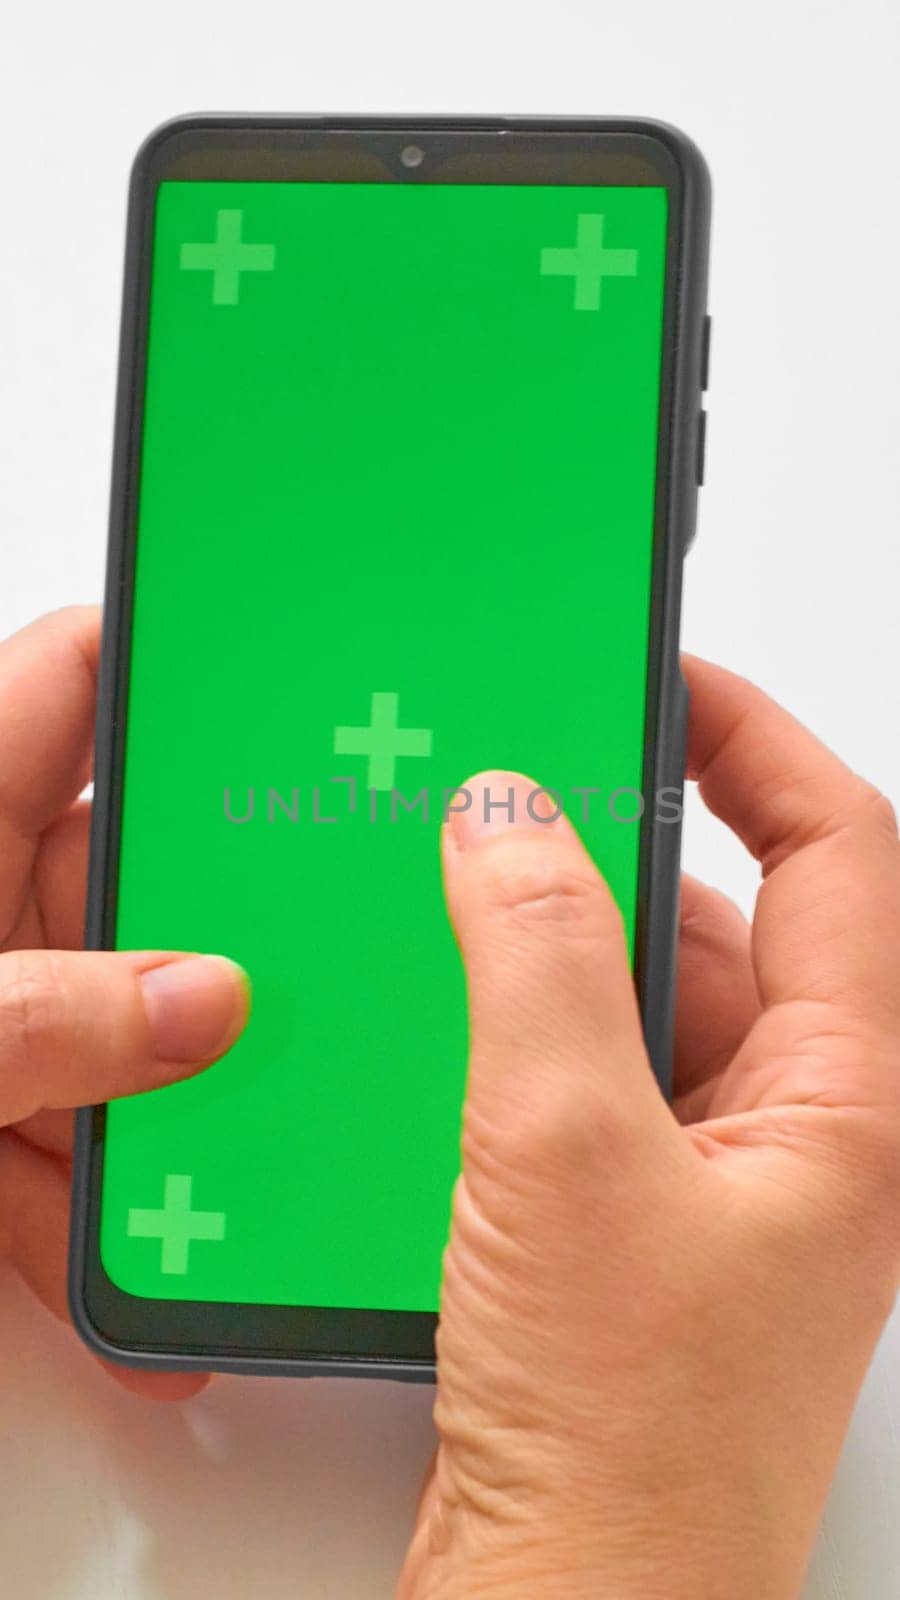 Elderly woman hands holding smartphone with green screen. The chromakey. Green screen